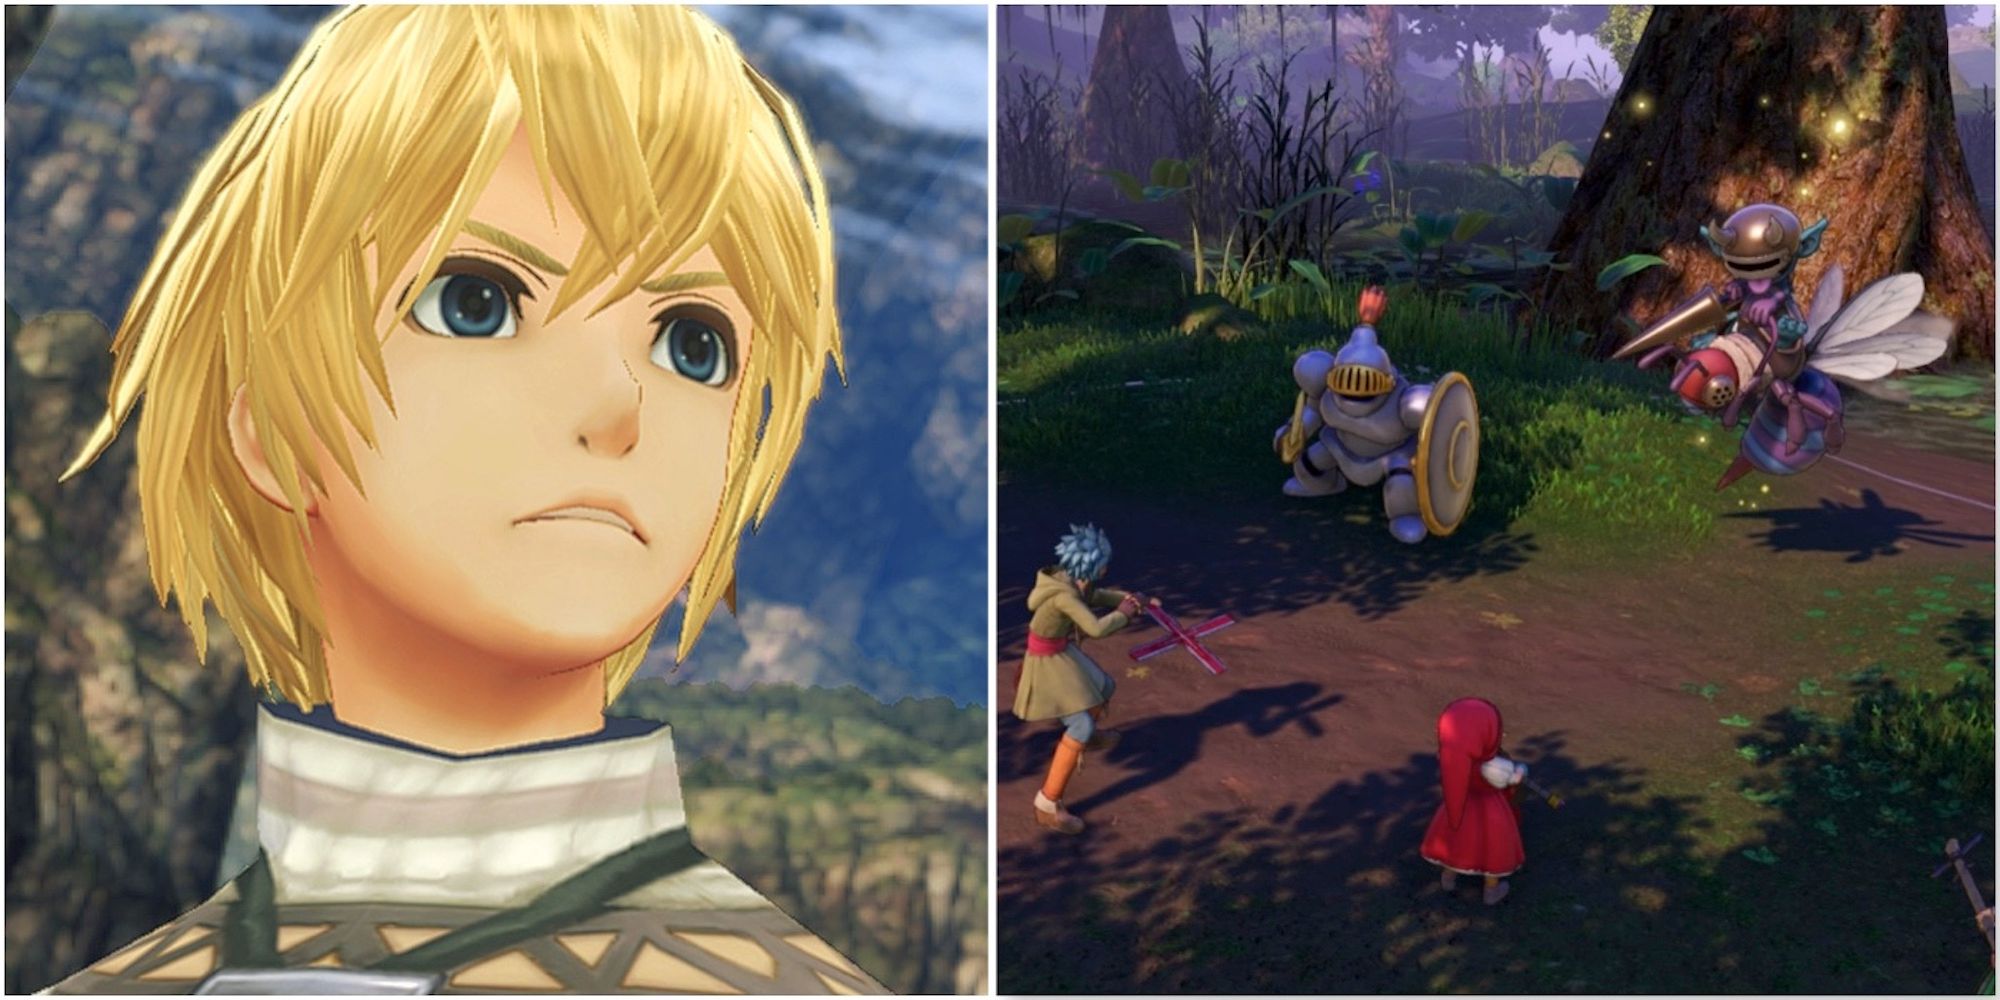 Shulk in Xenoblade Chronicles and fighting a battle in Dragon Quest 11